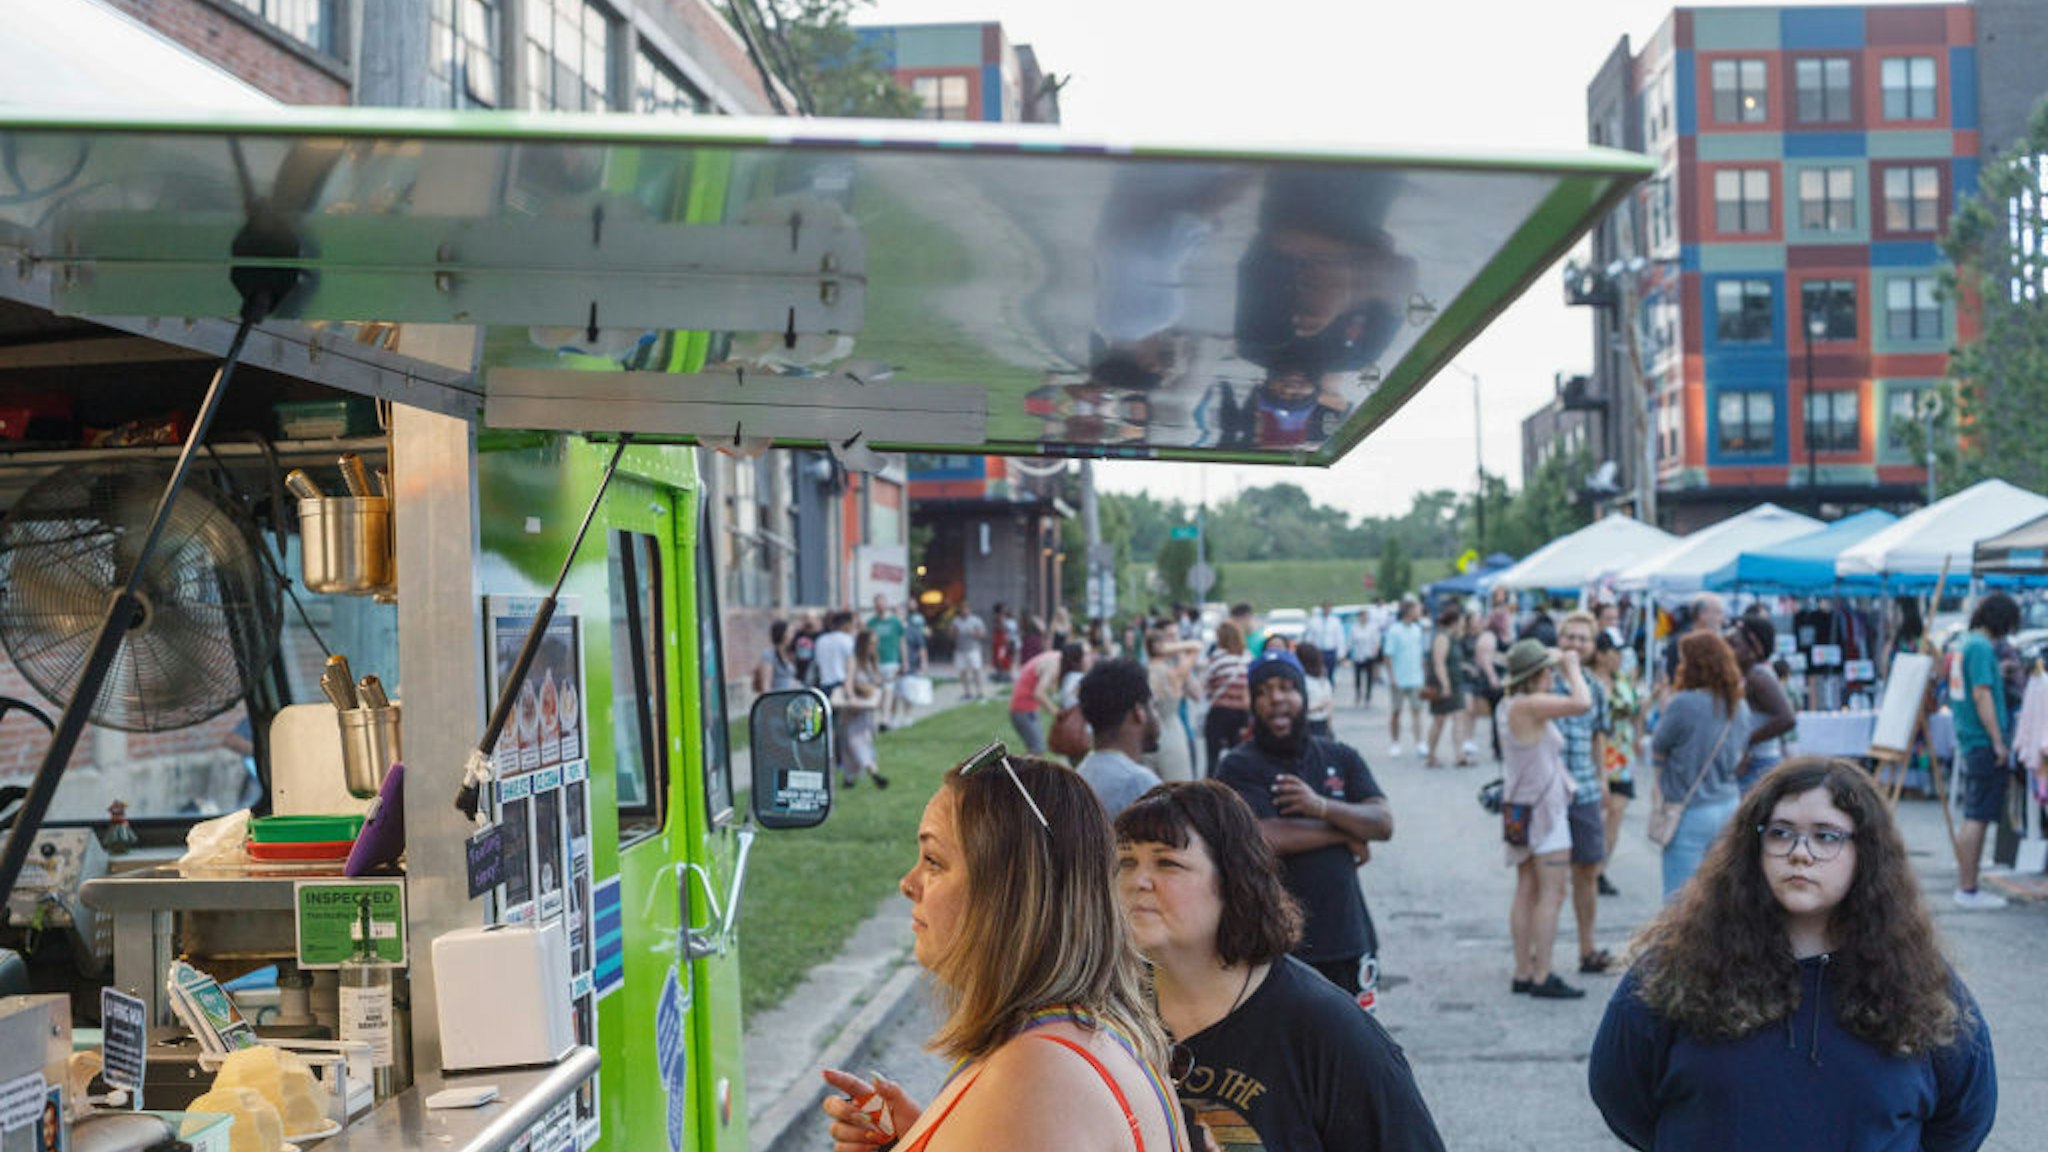 Patrons receive refreshments at food trucks during Franklinton Fridays.